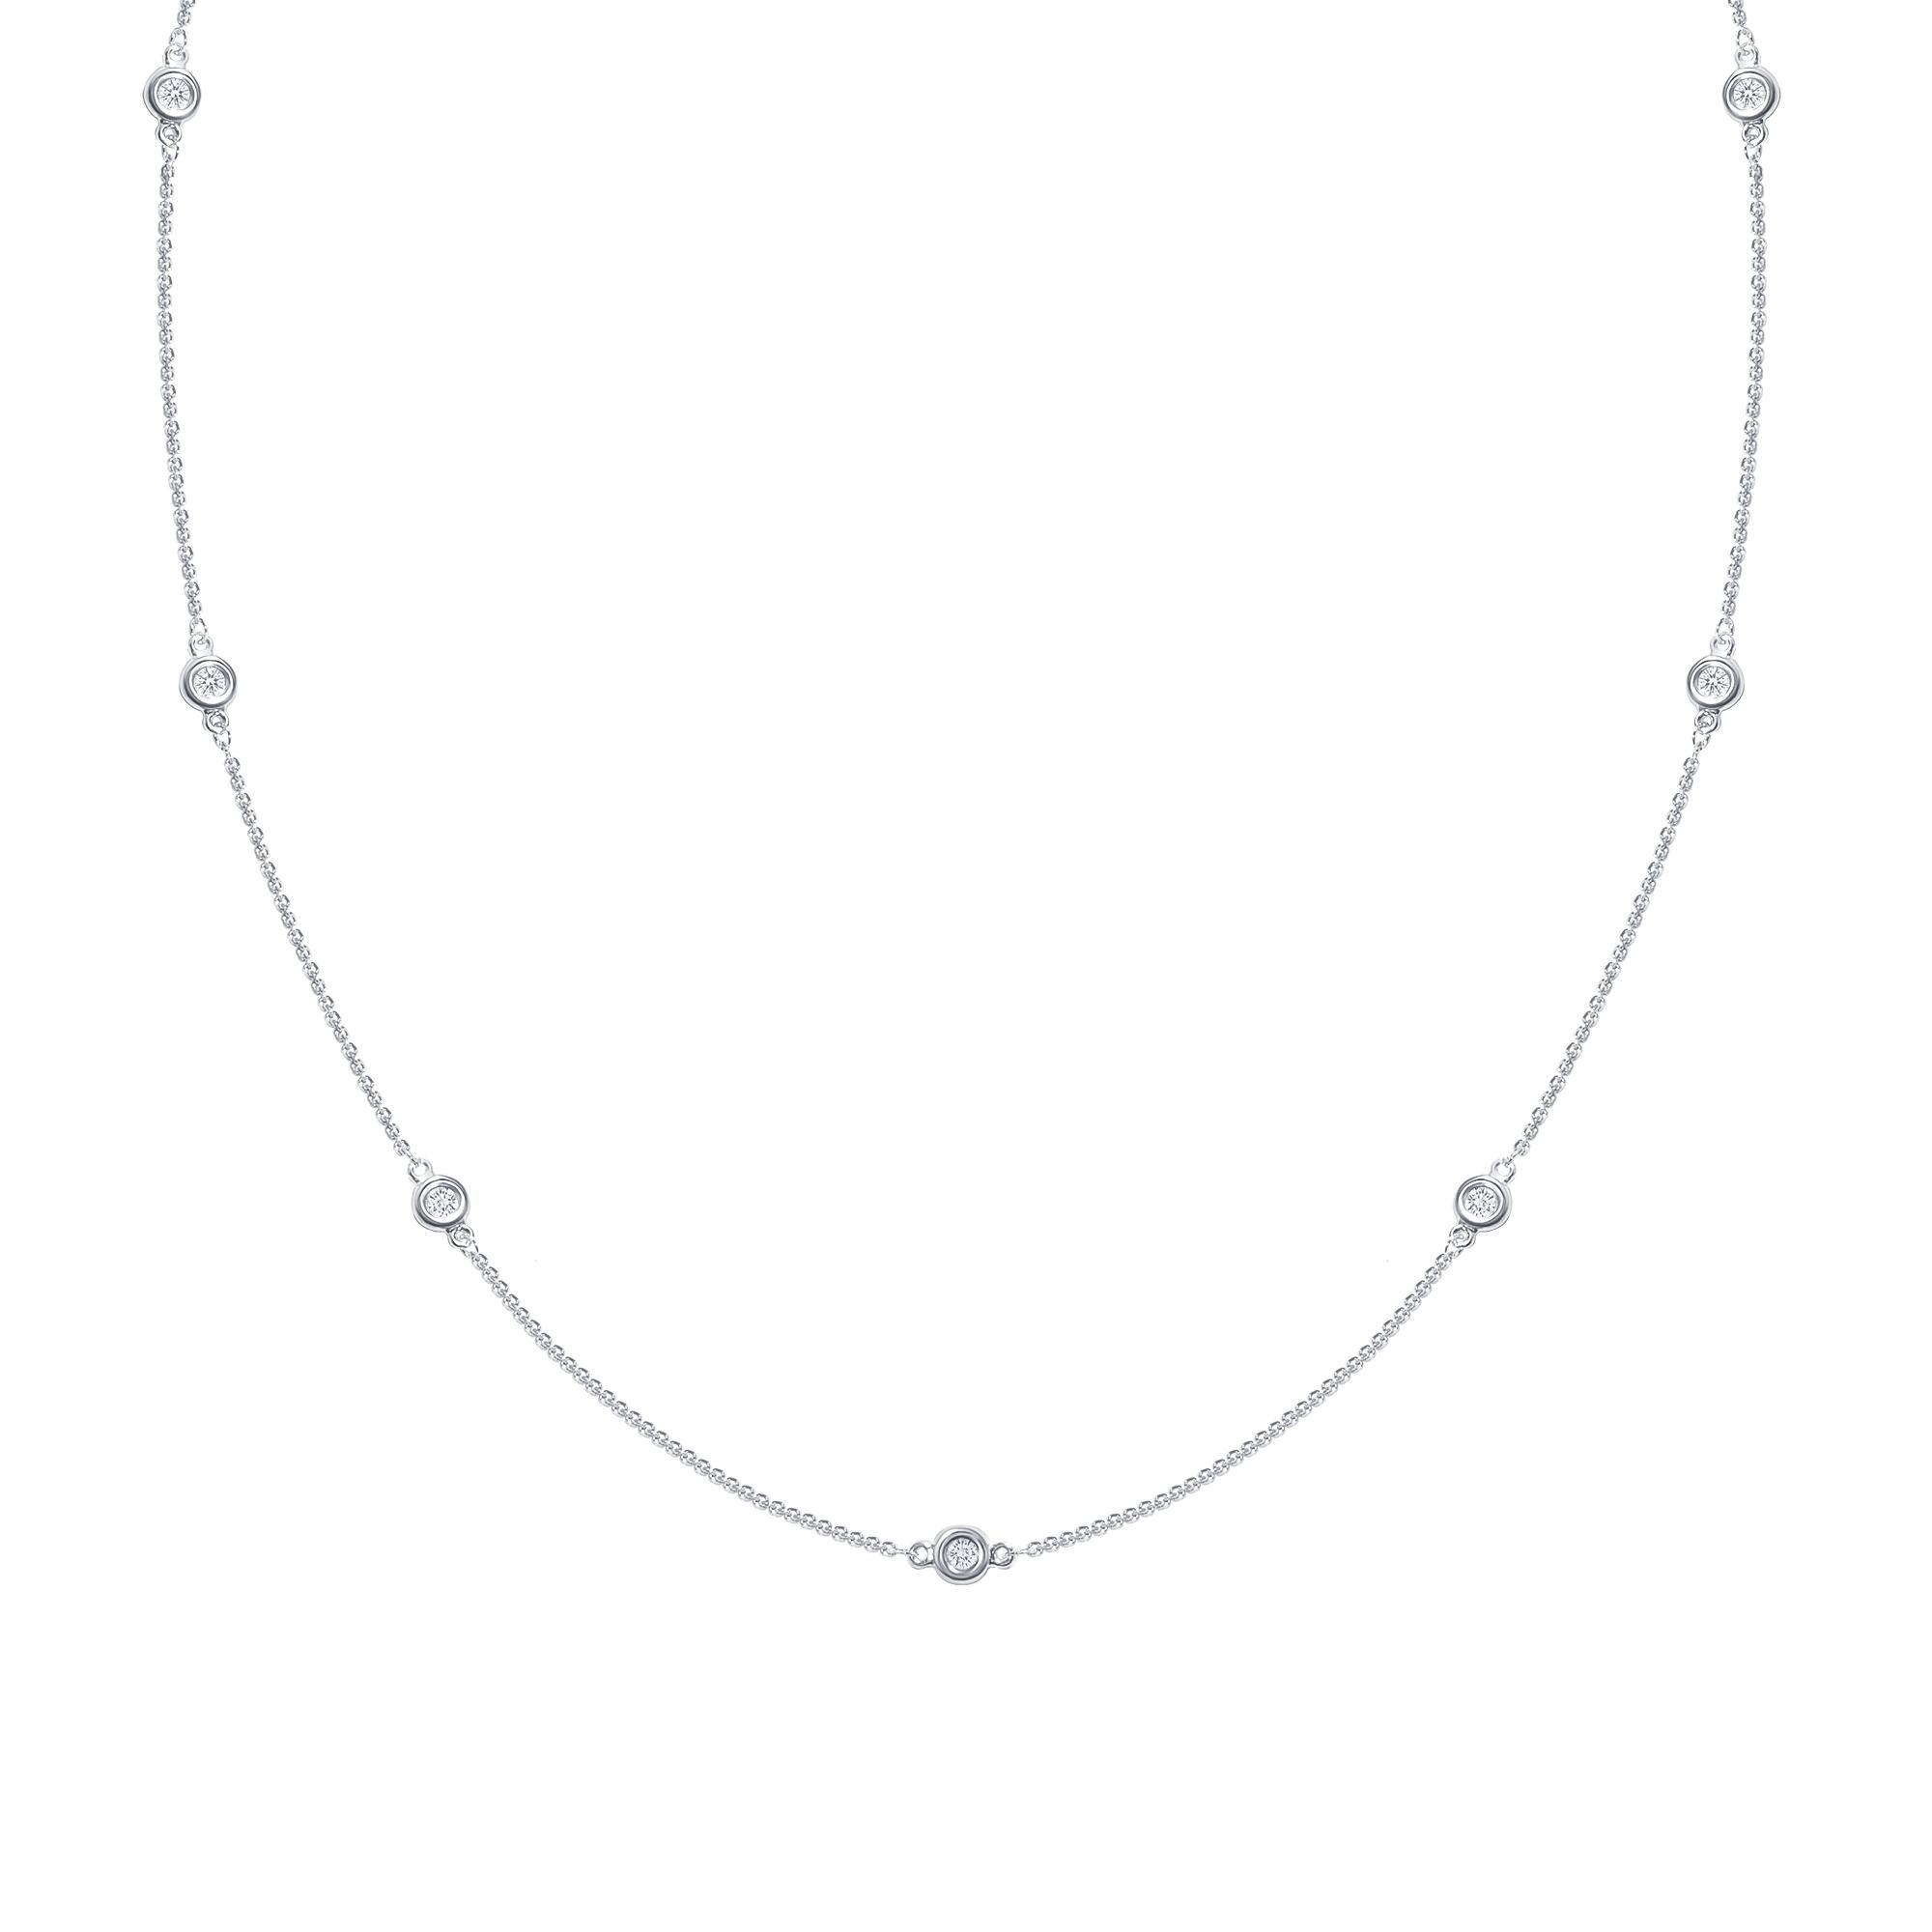 Eight elegant round diamonds set in a bezel setting along a 14k gold chain necklace.

Gold: 14K Gold
Number of Diamonds: Eight
Gold Color: White Gold
Carat: 1.5 Carat
Necklace Length: 24 Inches
Diamond Clarity: VS
Diamond Color: F
Chain Type: